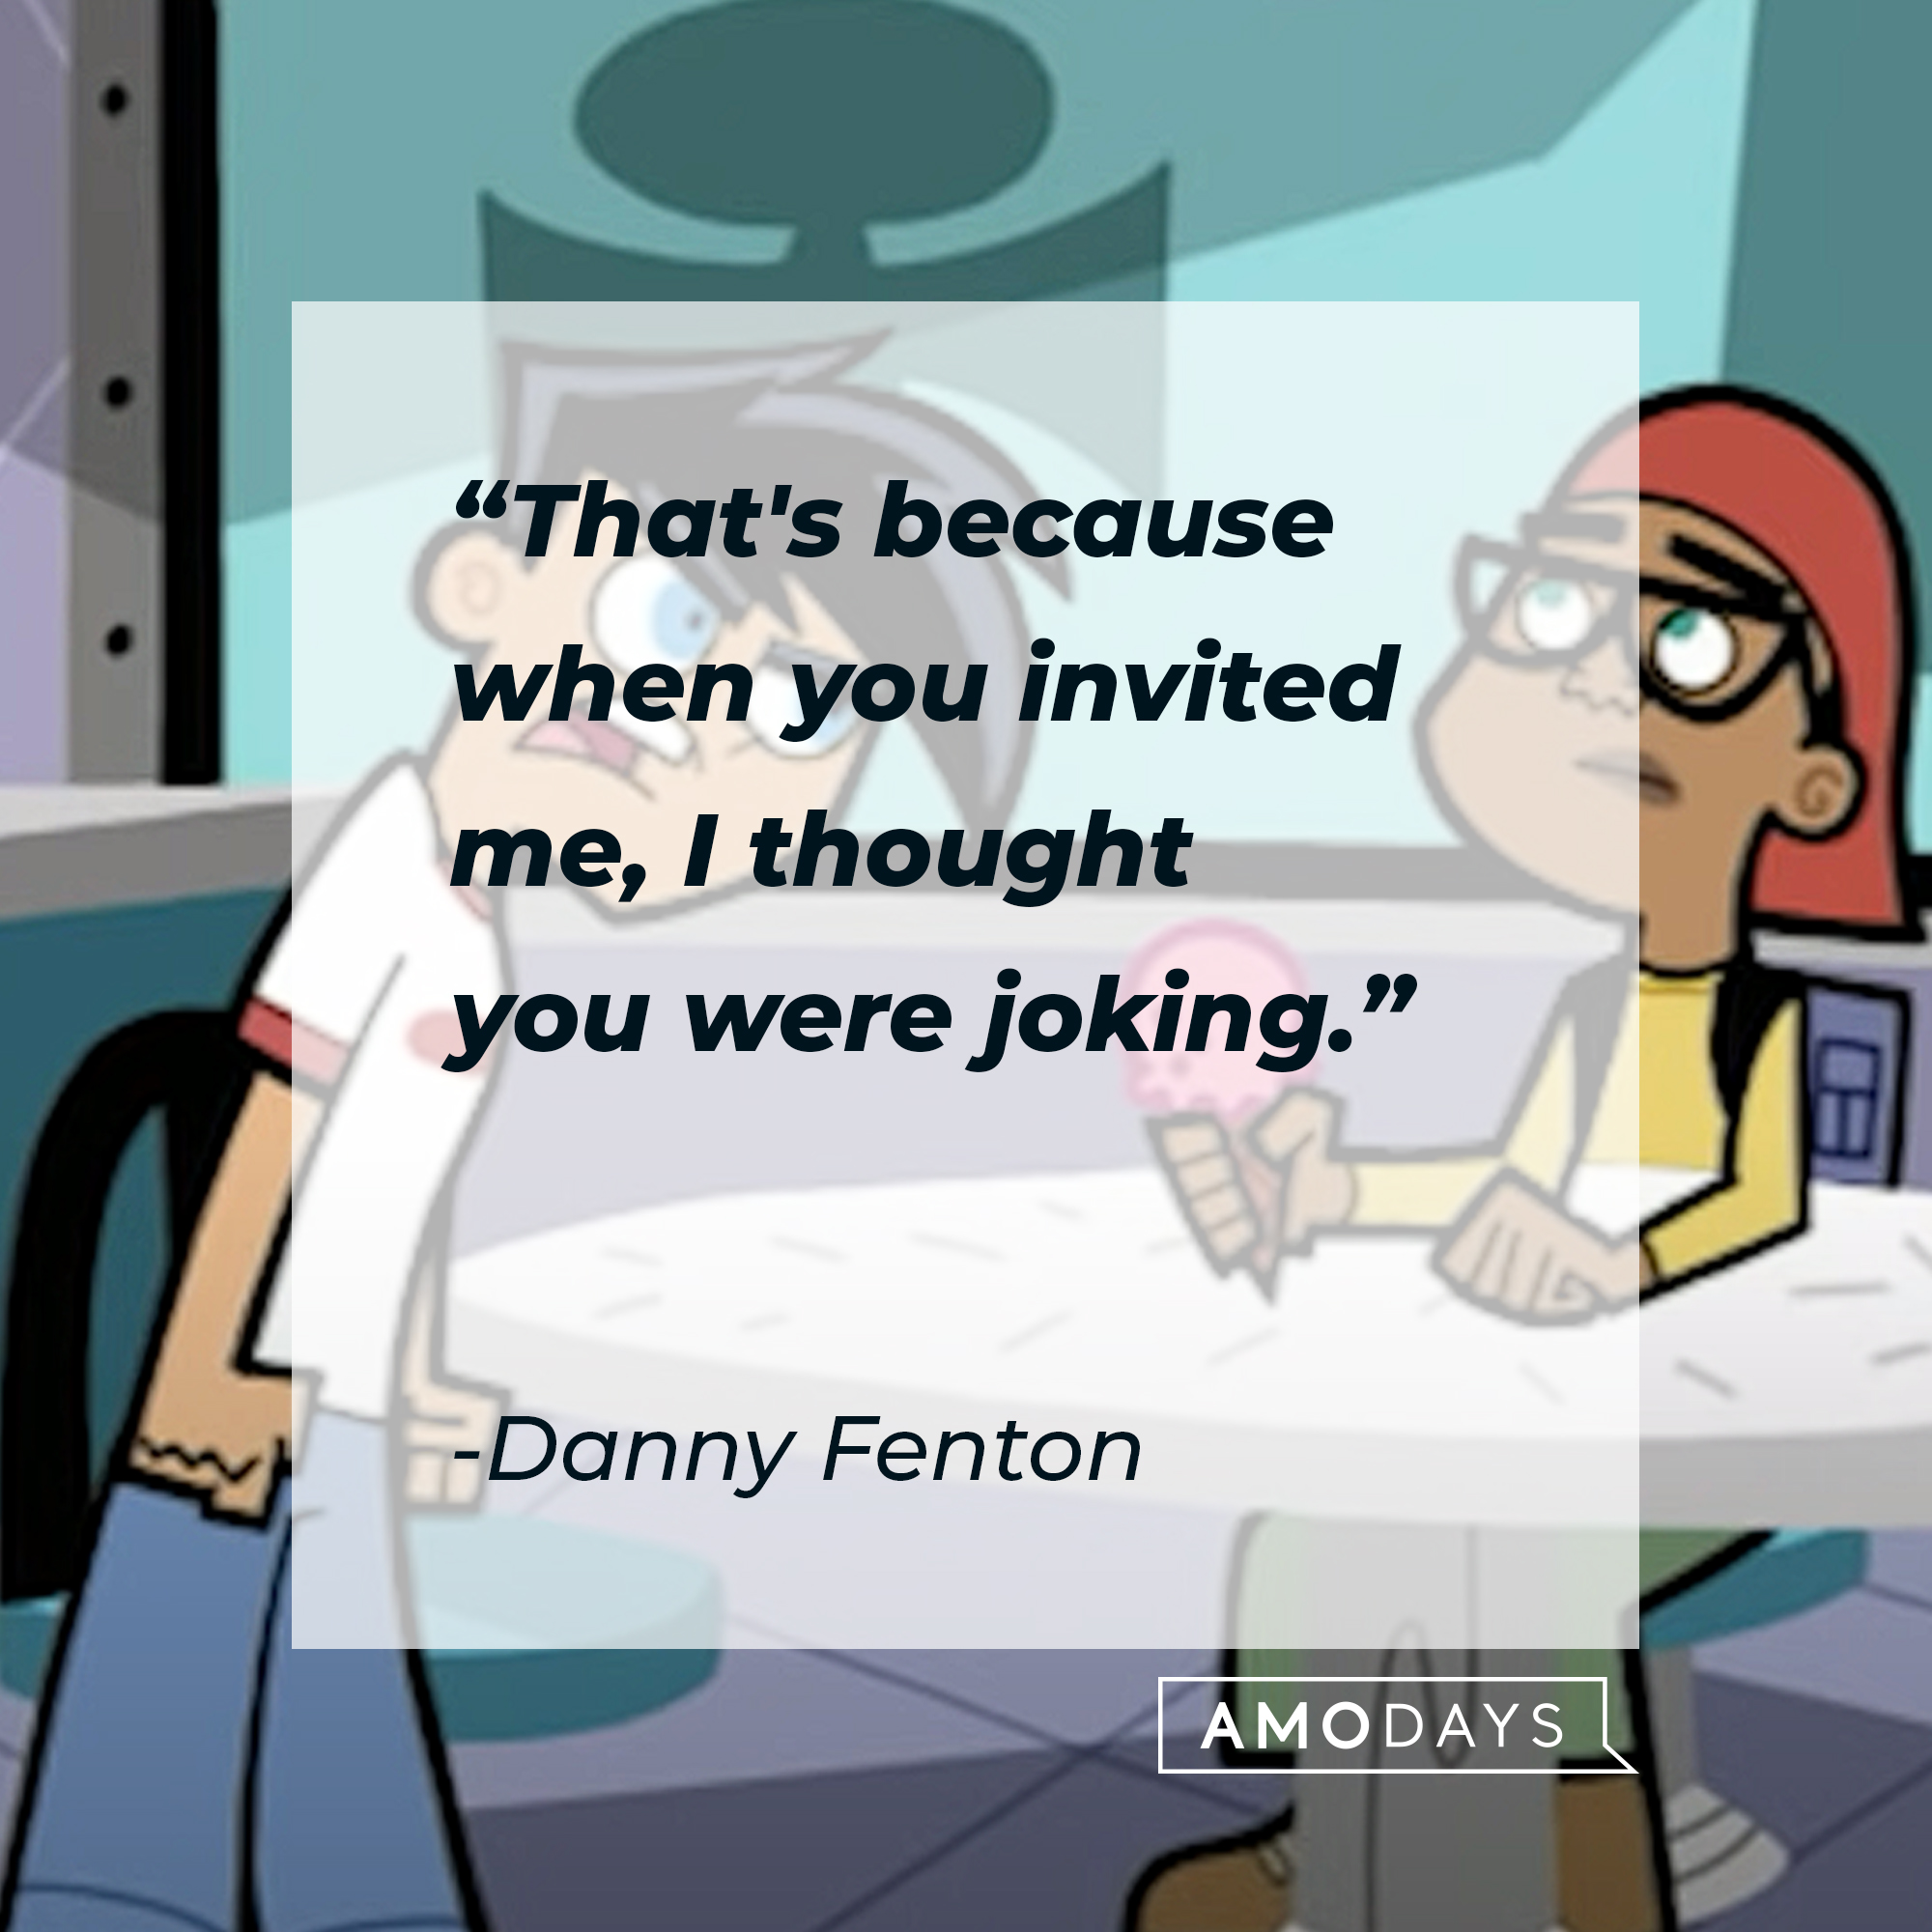 An image of Danny Fenton and Tucker Foley with Danny Fenton’s quote: “That's because when you invited me, I thought you were joking."  | Source: youtube.com/nickrewind